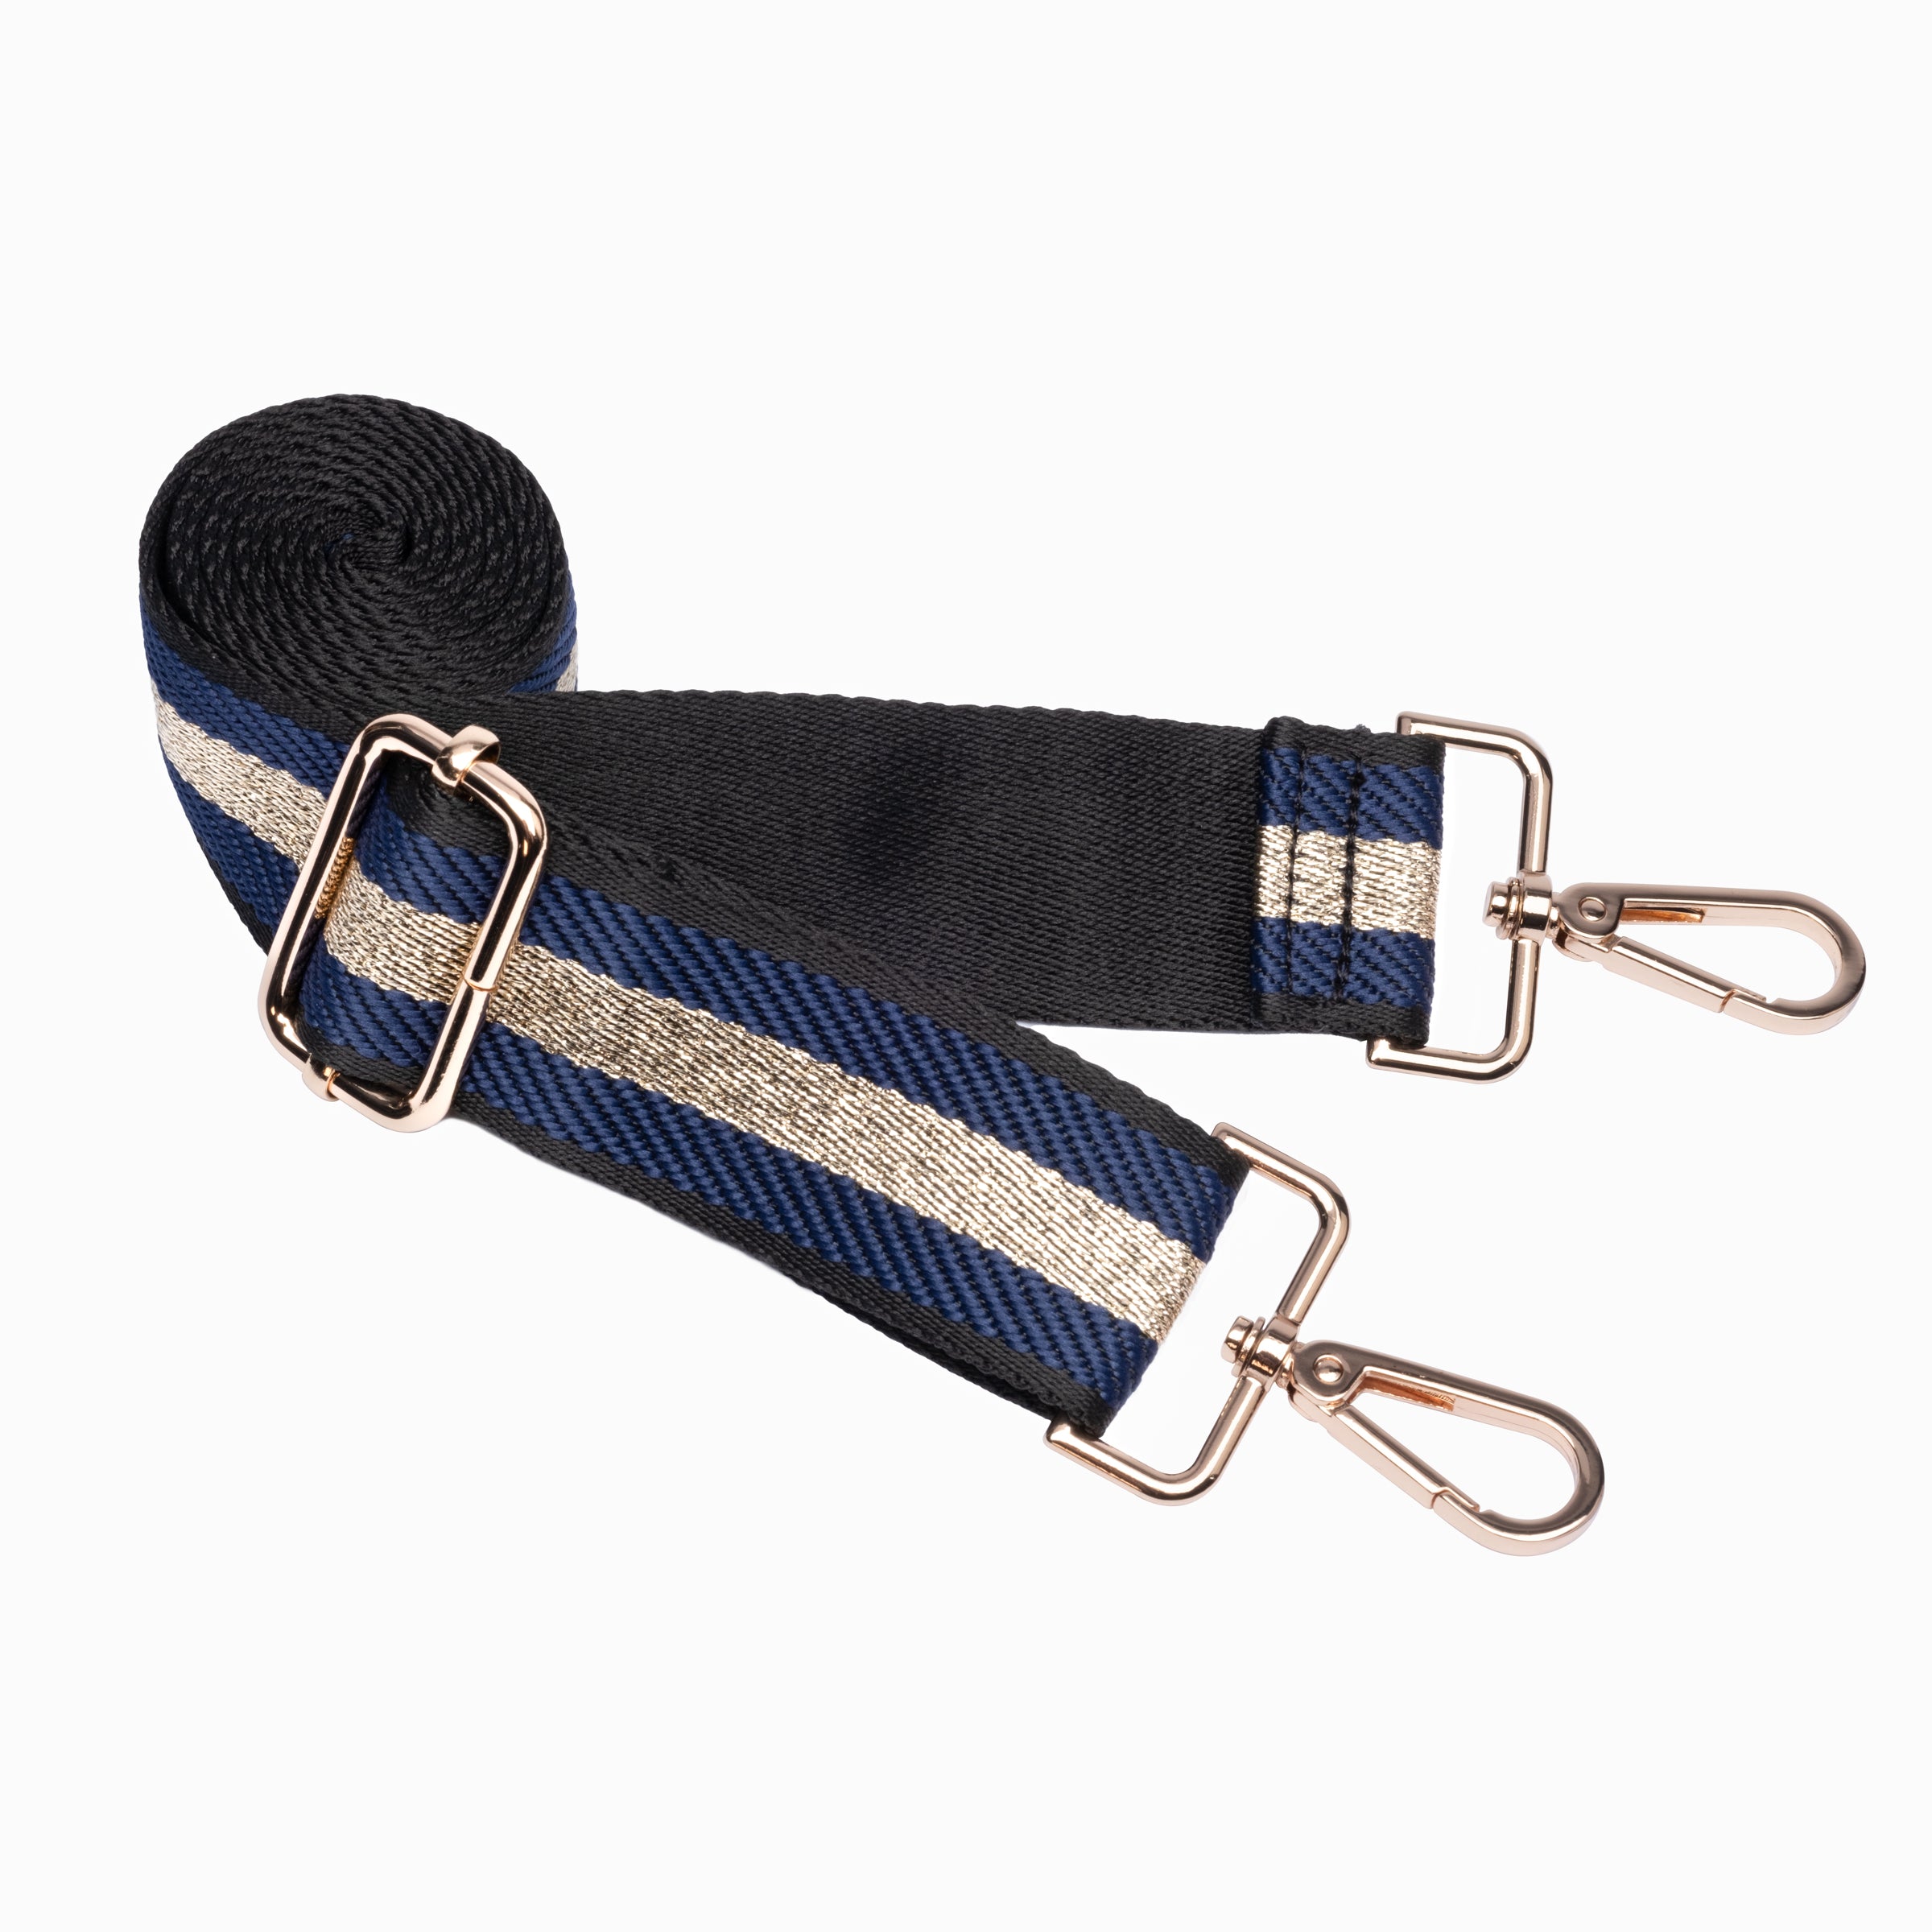 Wholesale Navy and Gold striped strap